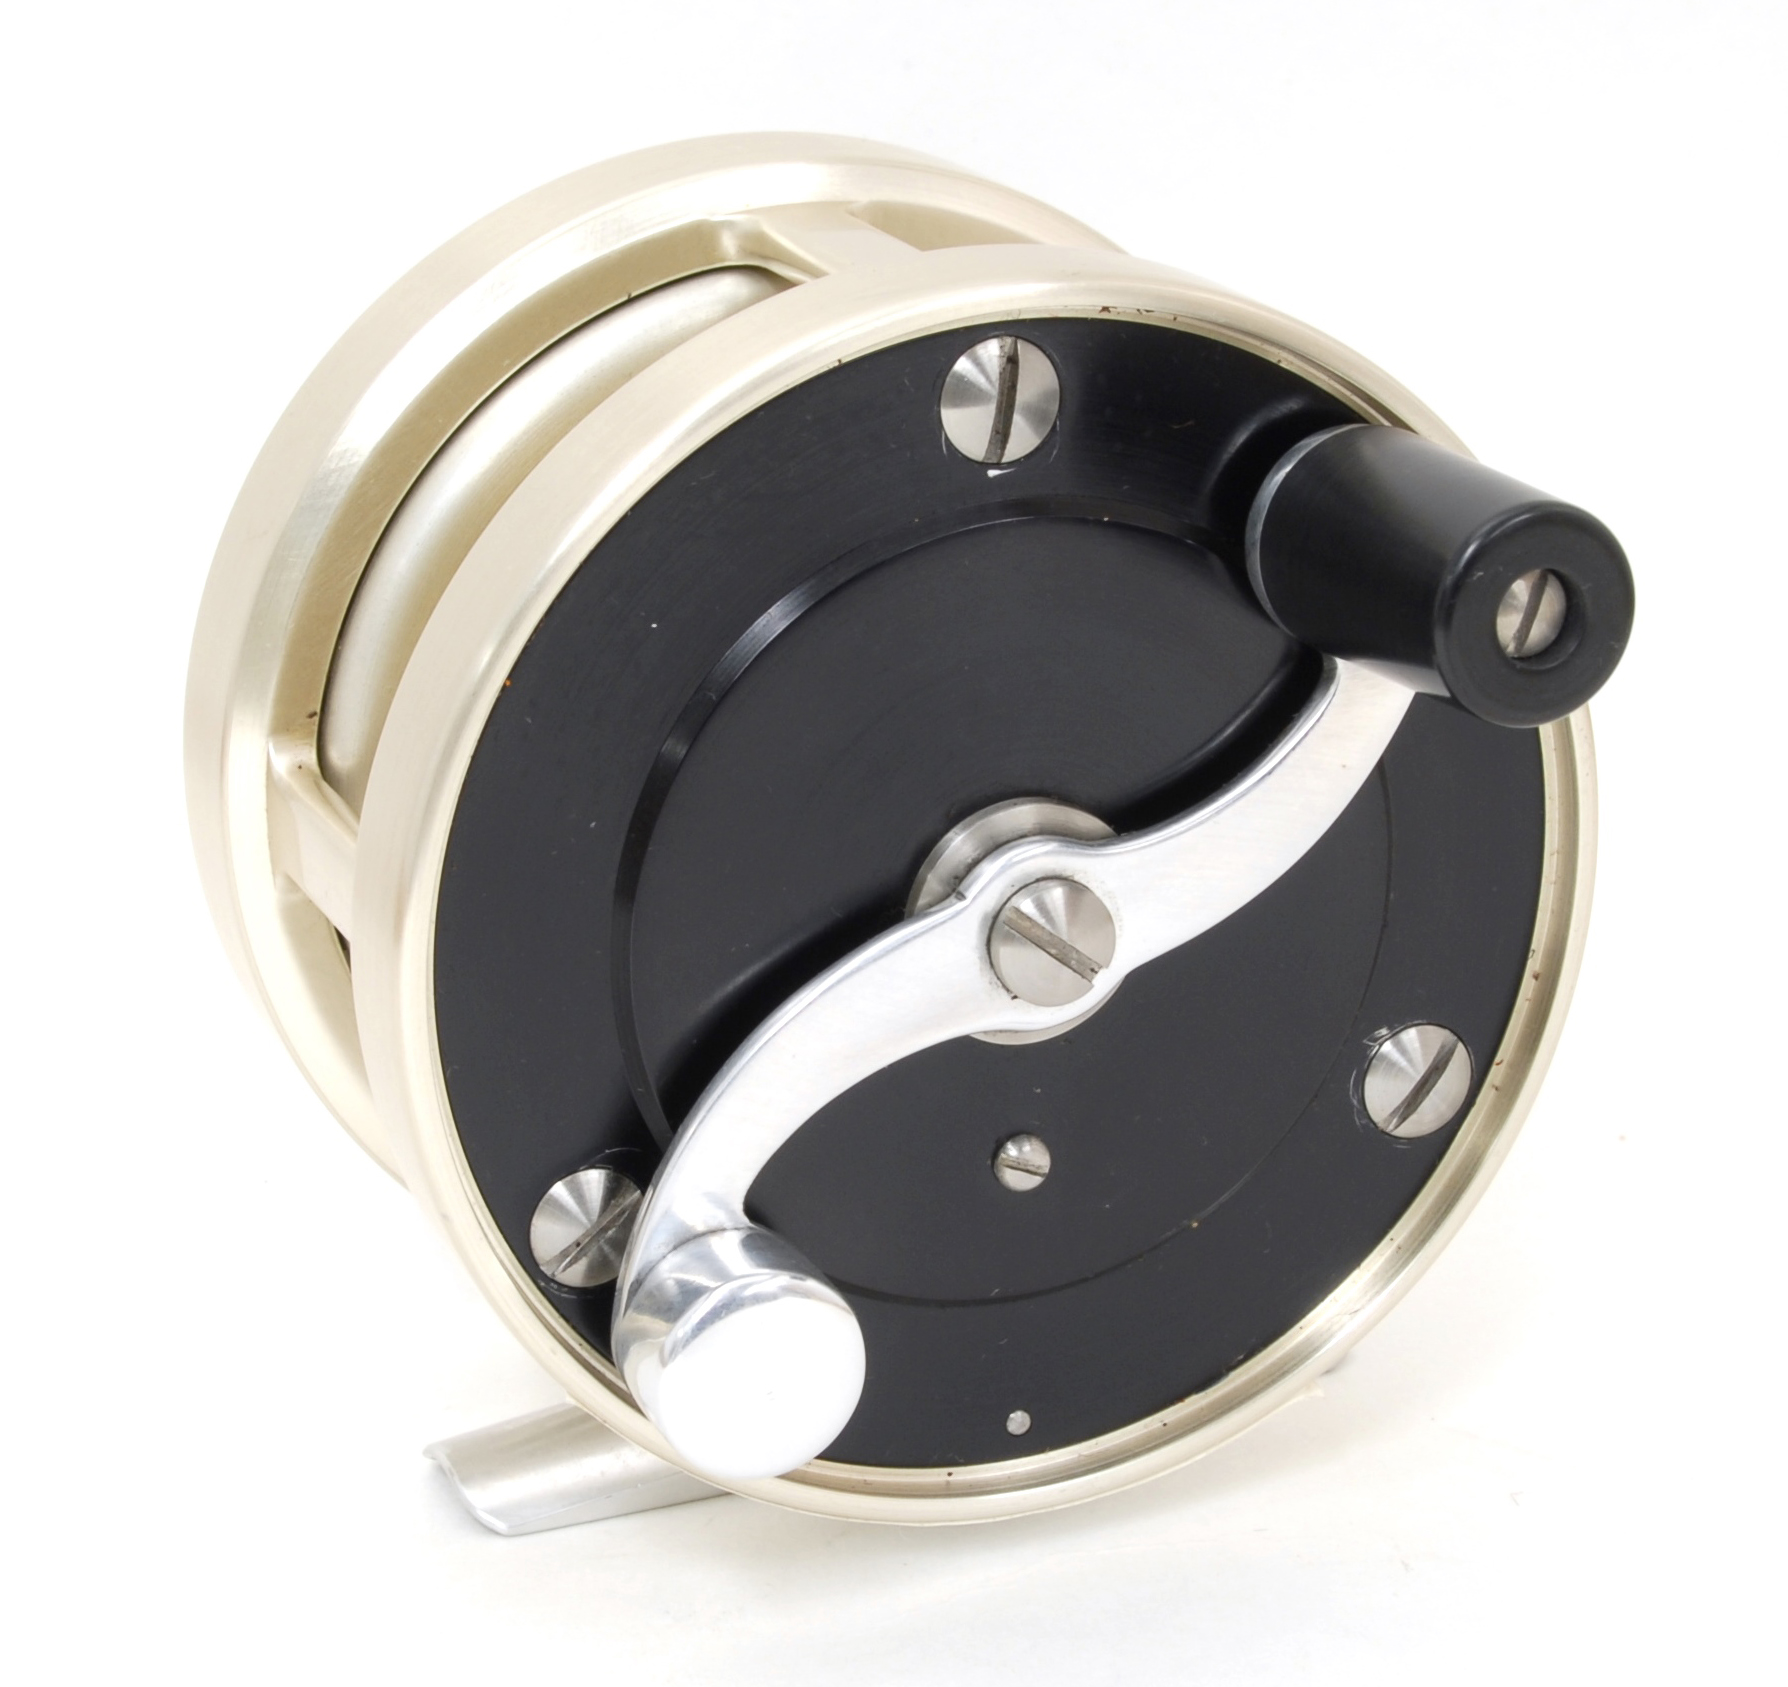 In Reel Time: Fly Reels Past & Present - American Museum Of Fly Fishing